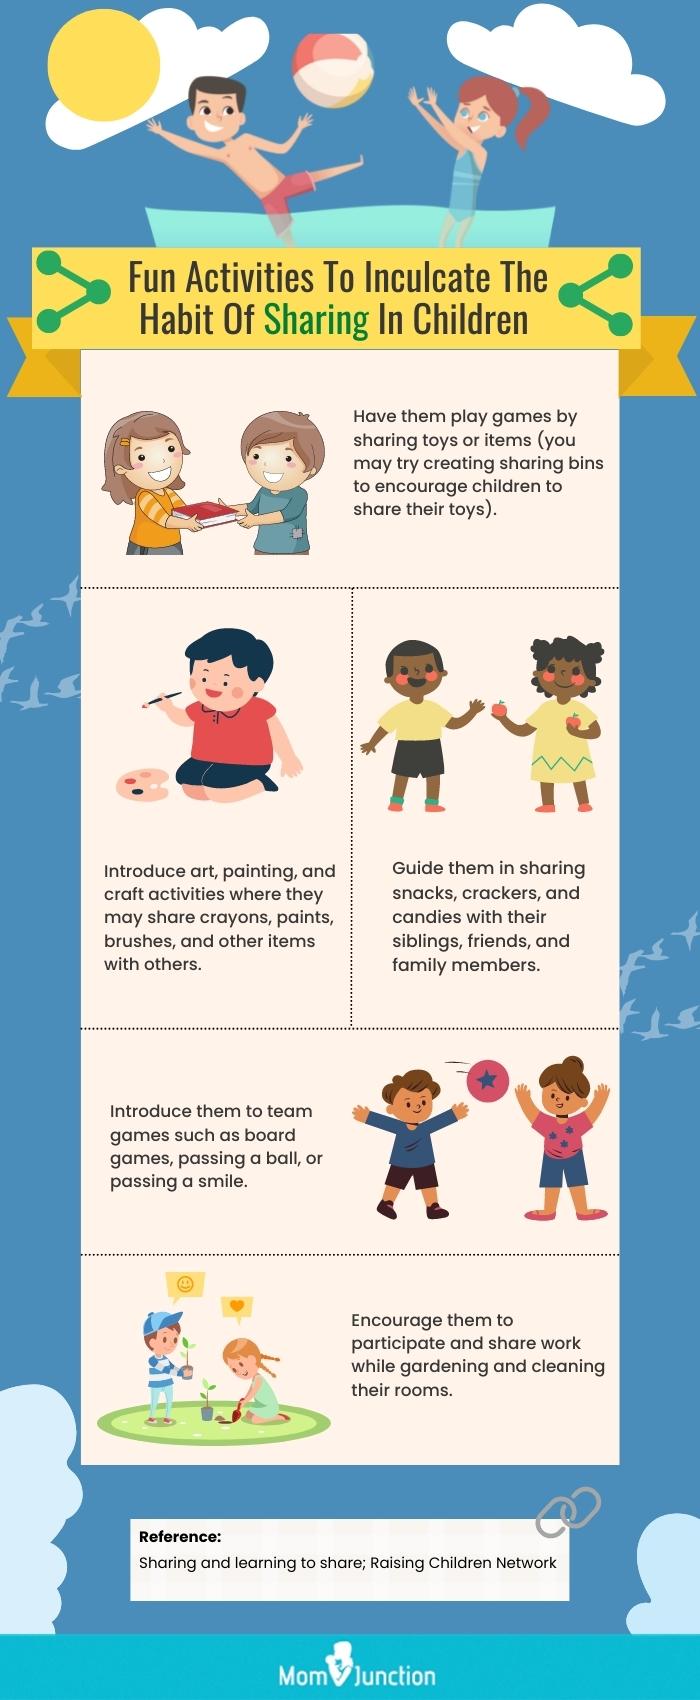 Teaching Your Child About Peers With Special Needs (8 Useful Tips)